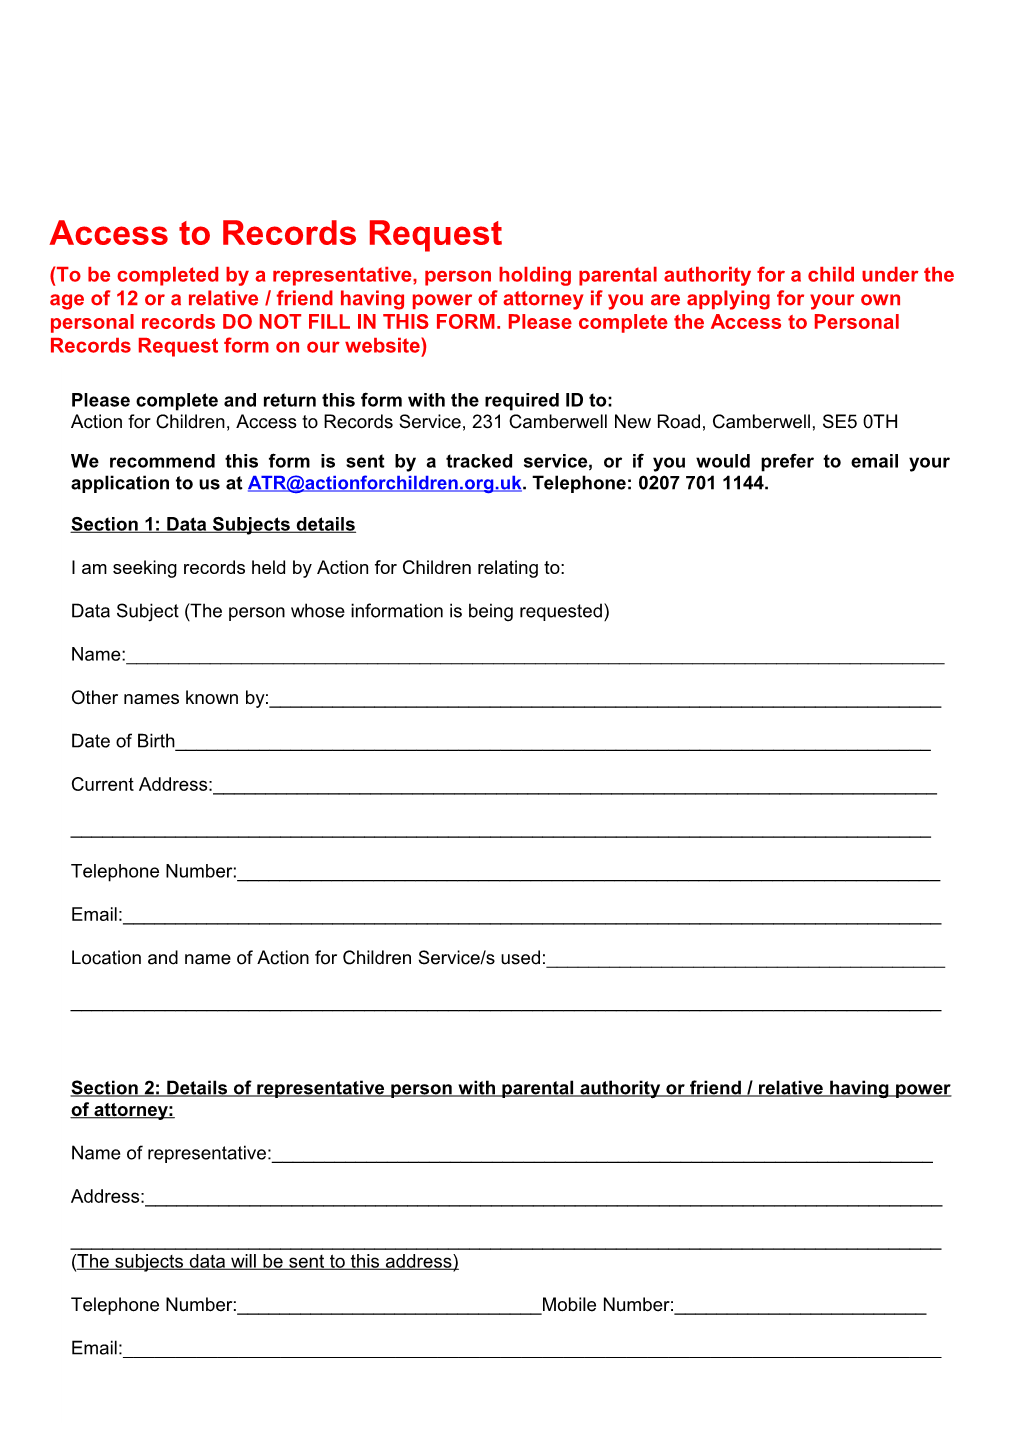 Access to Recordsrequest